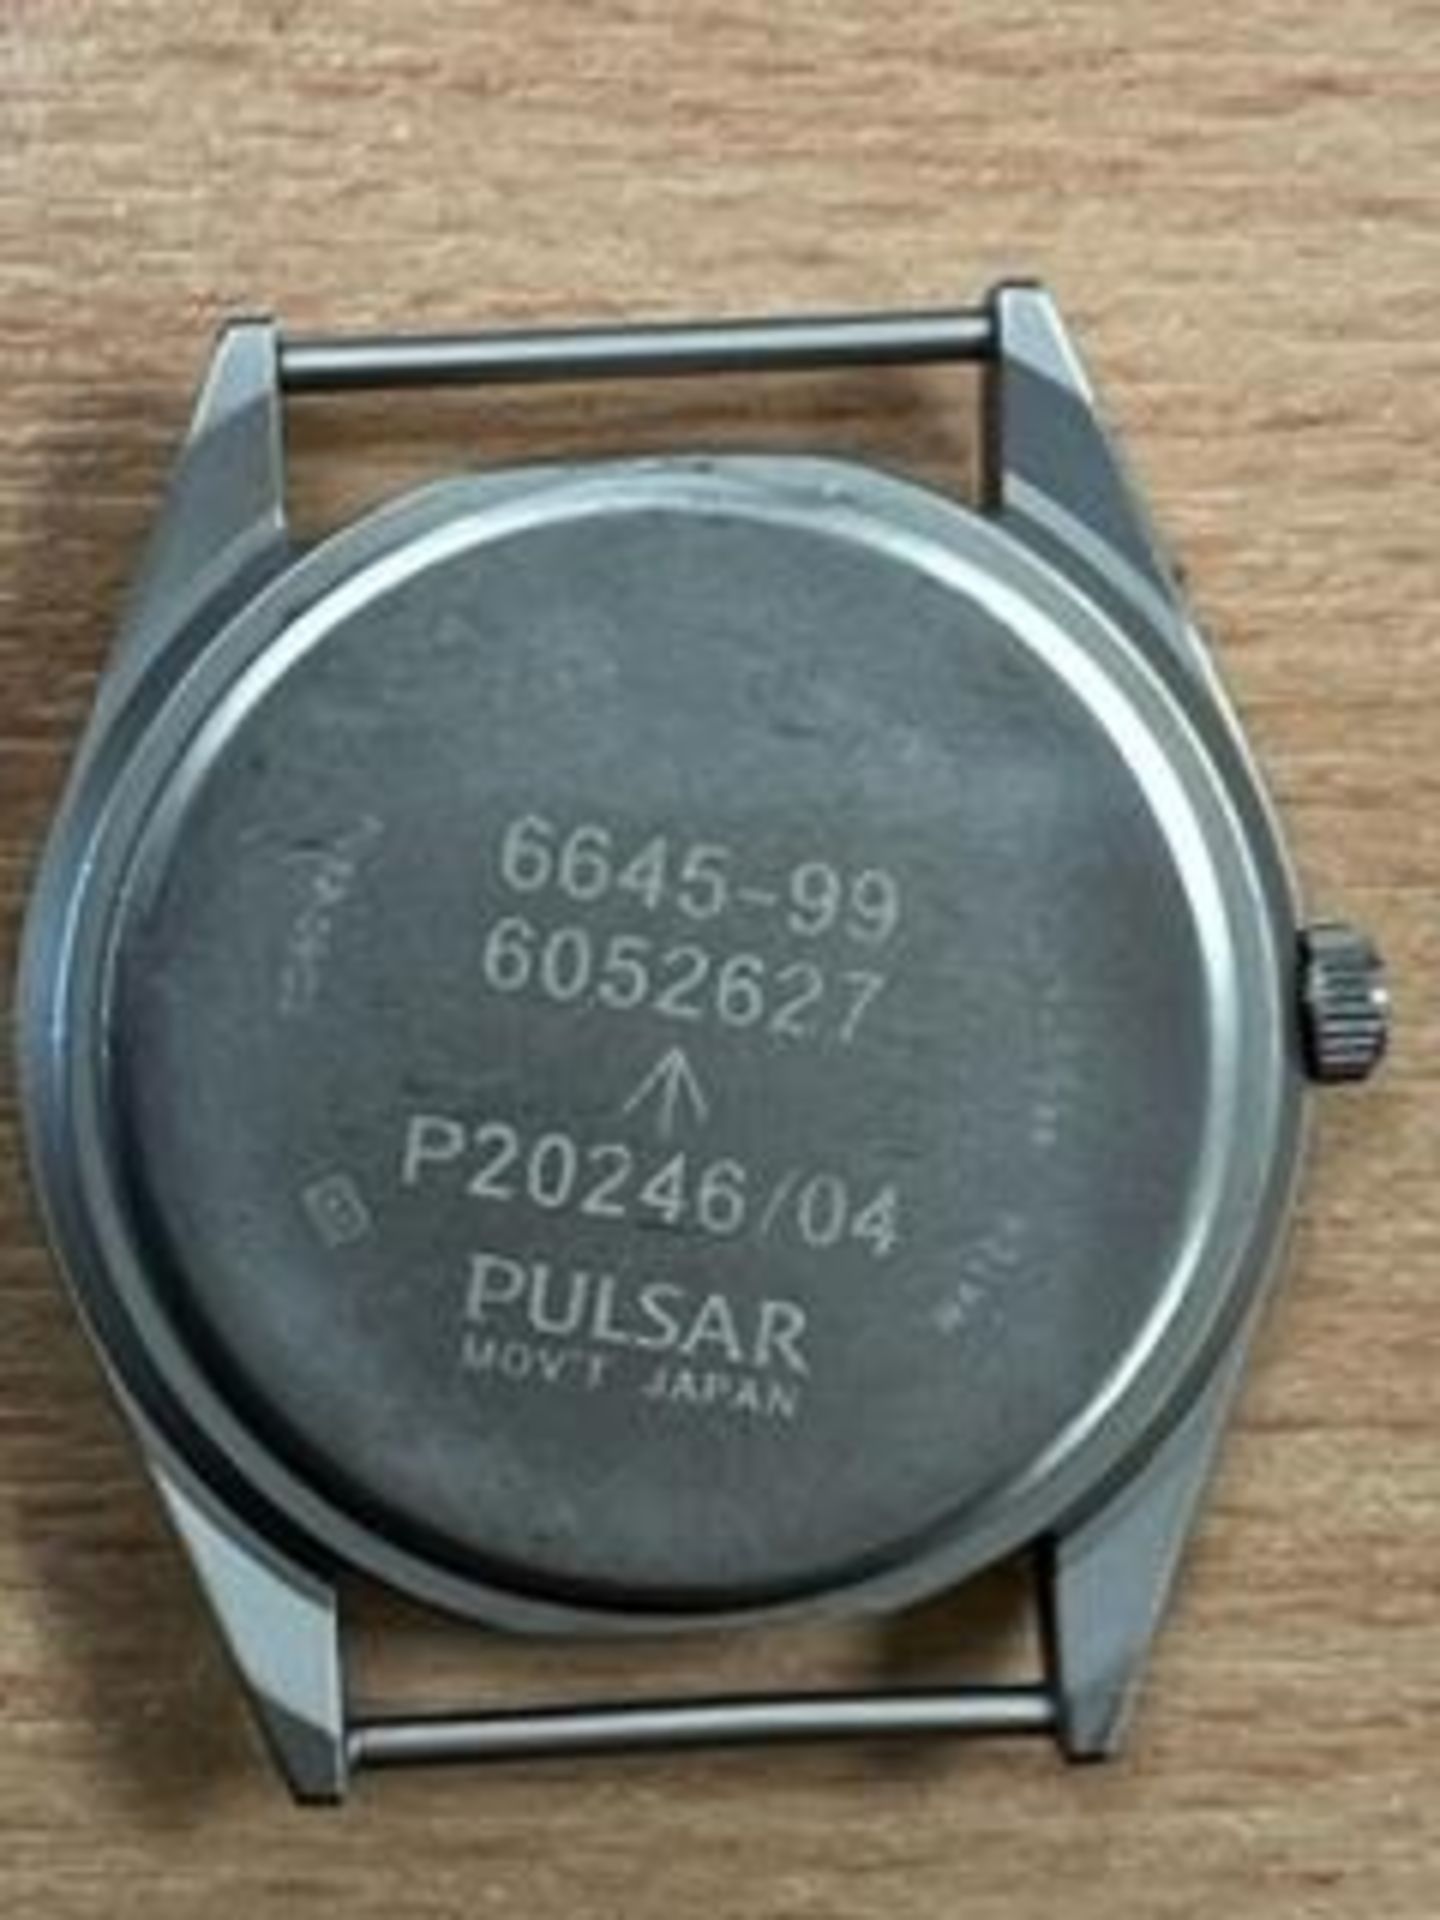 PULSAR BRITISH ARMY W10 SERVICE WATCH WATER RESISTANT NATO MARKS DATE 2004 - Image 4 of 6